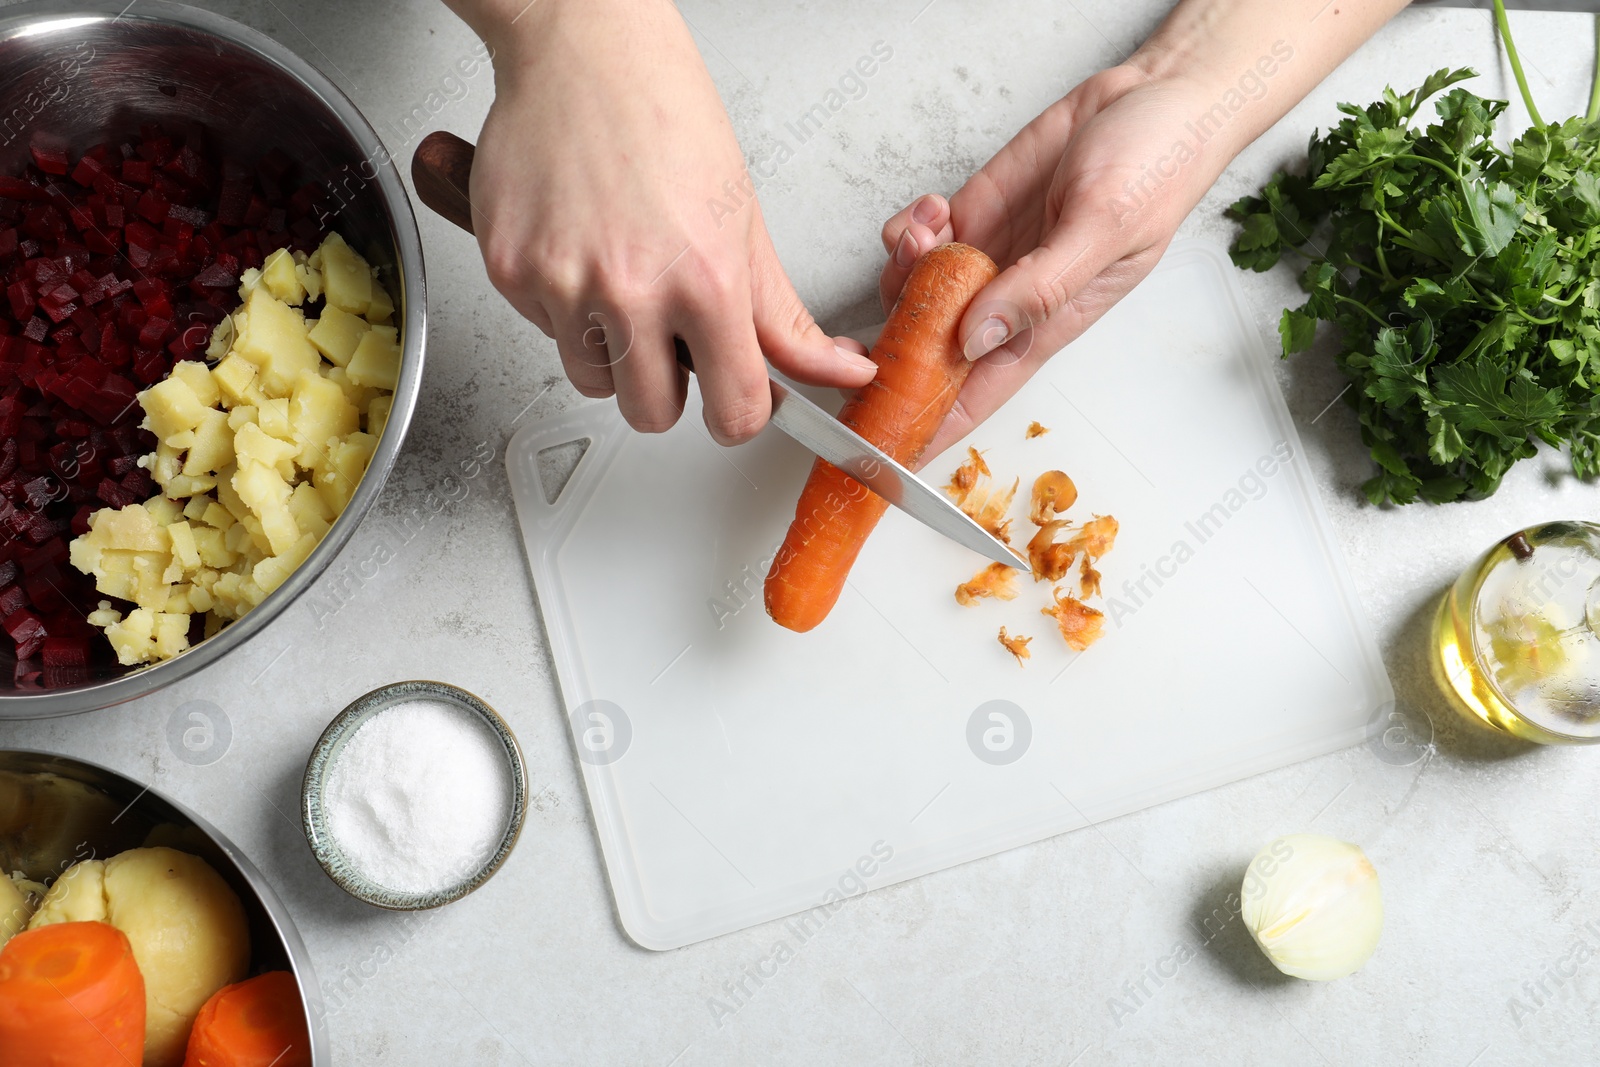 Photo of Woman peeling boiled carrot at white table, top view. Cooking vinaigrette salad